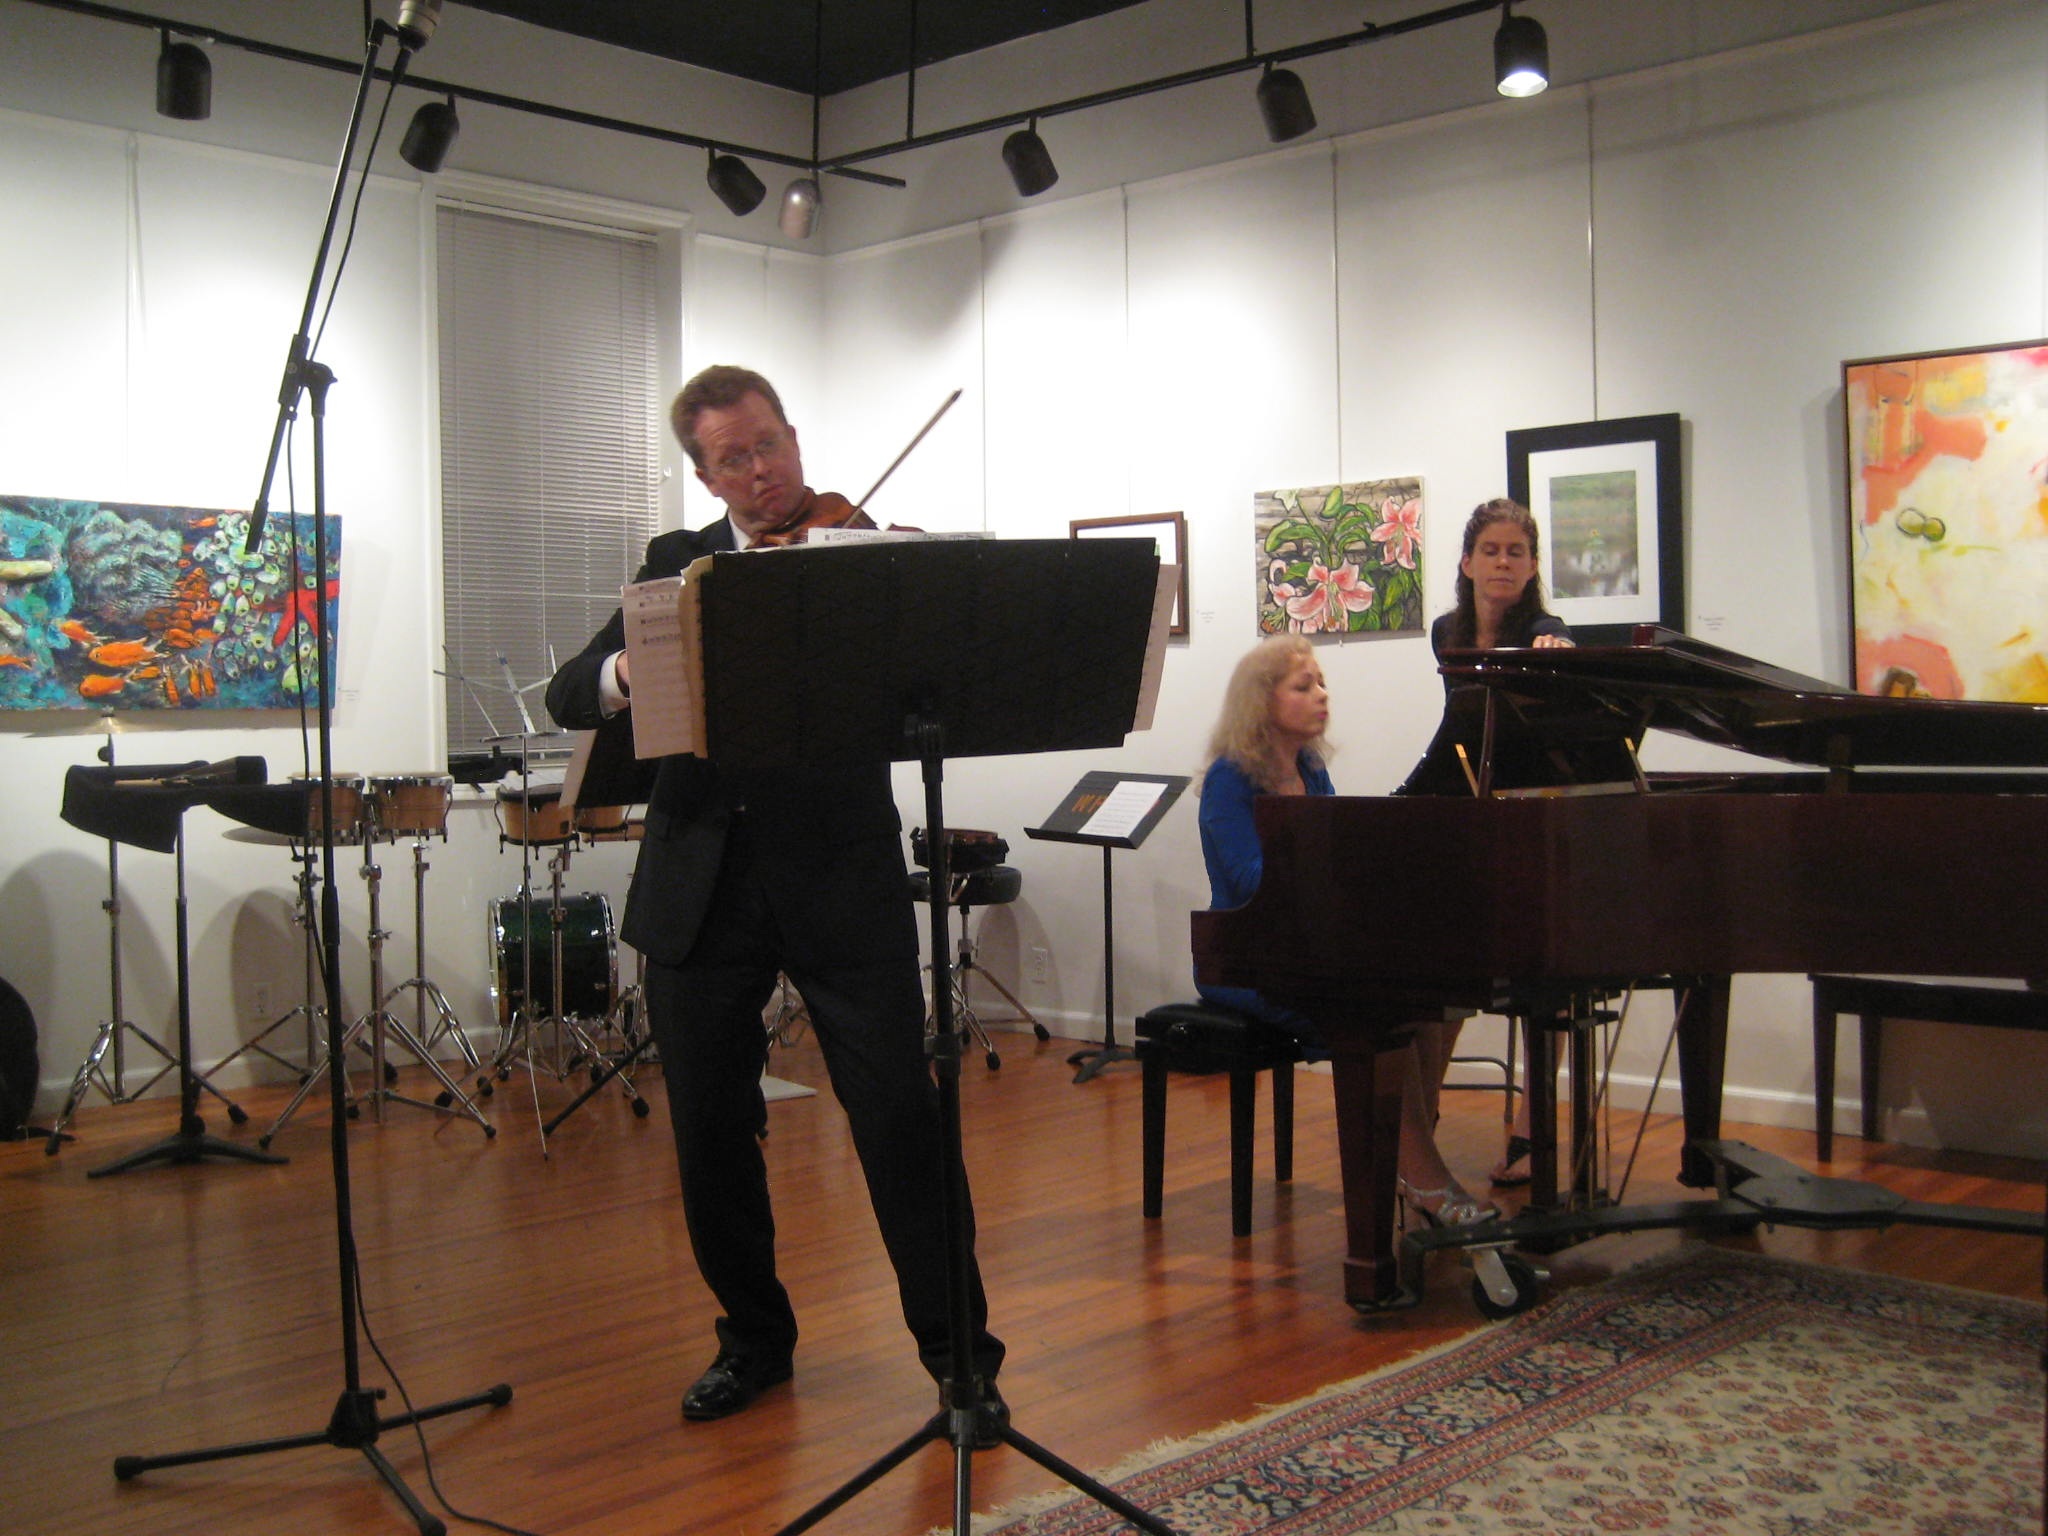 With Brett Deubner at the Watchung Arts Center Concert, May 5, 2012